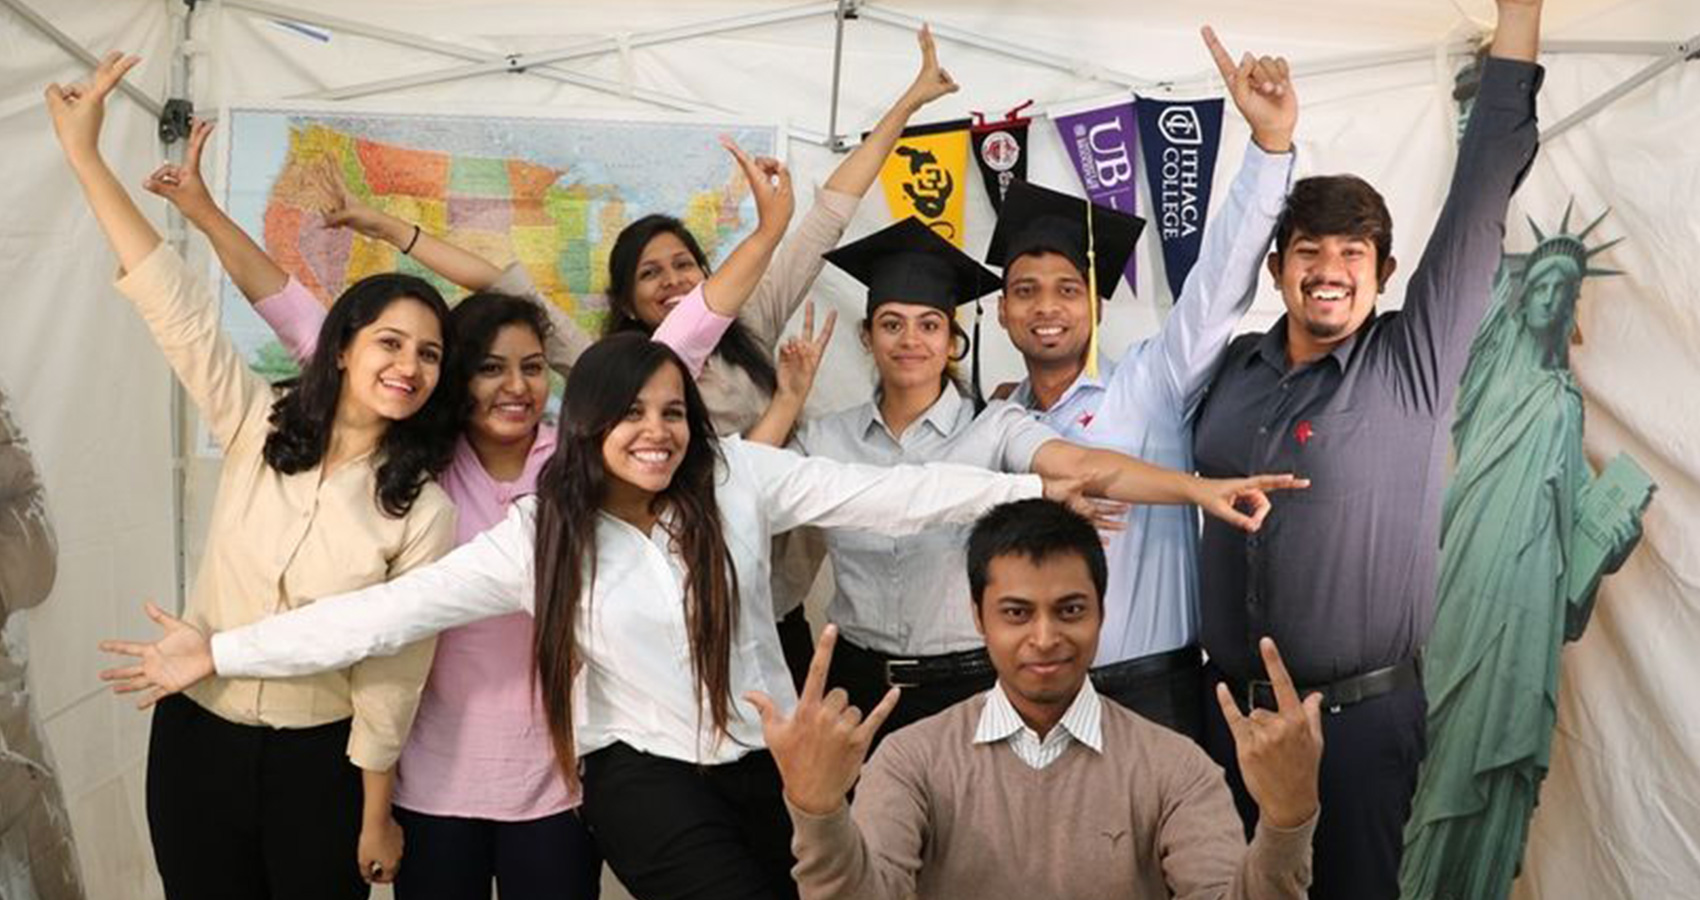 U.S. Continues As Top Choice For Students From India